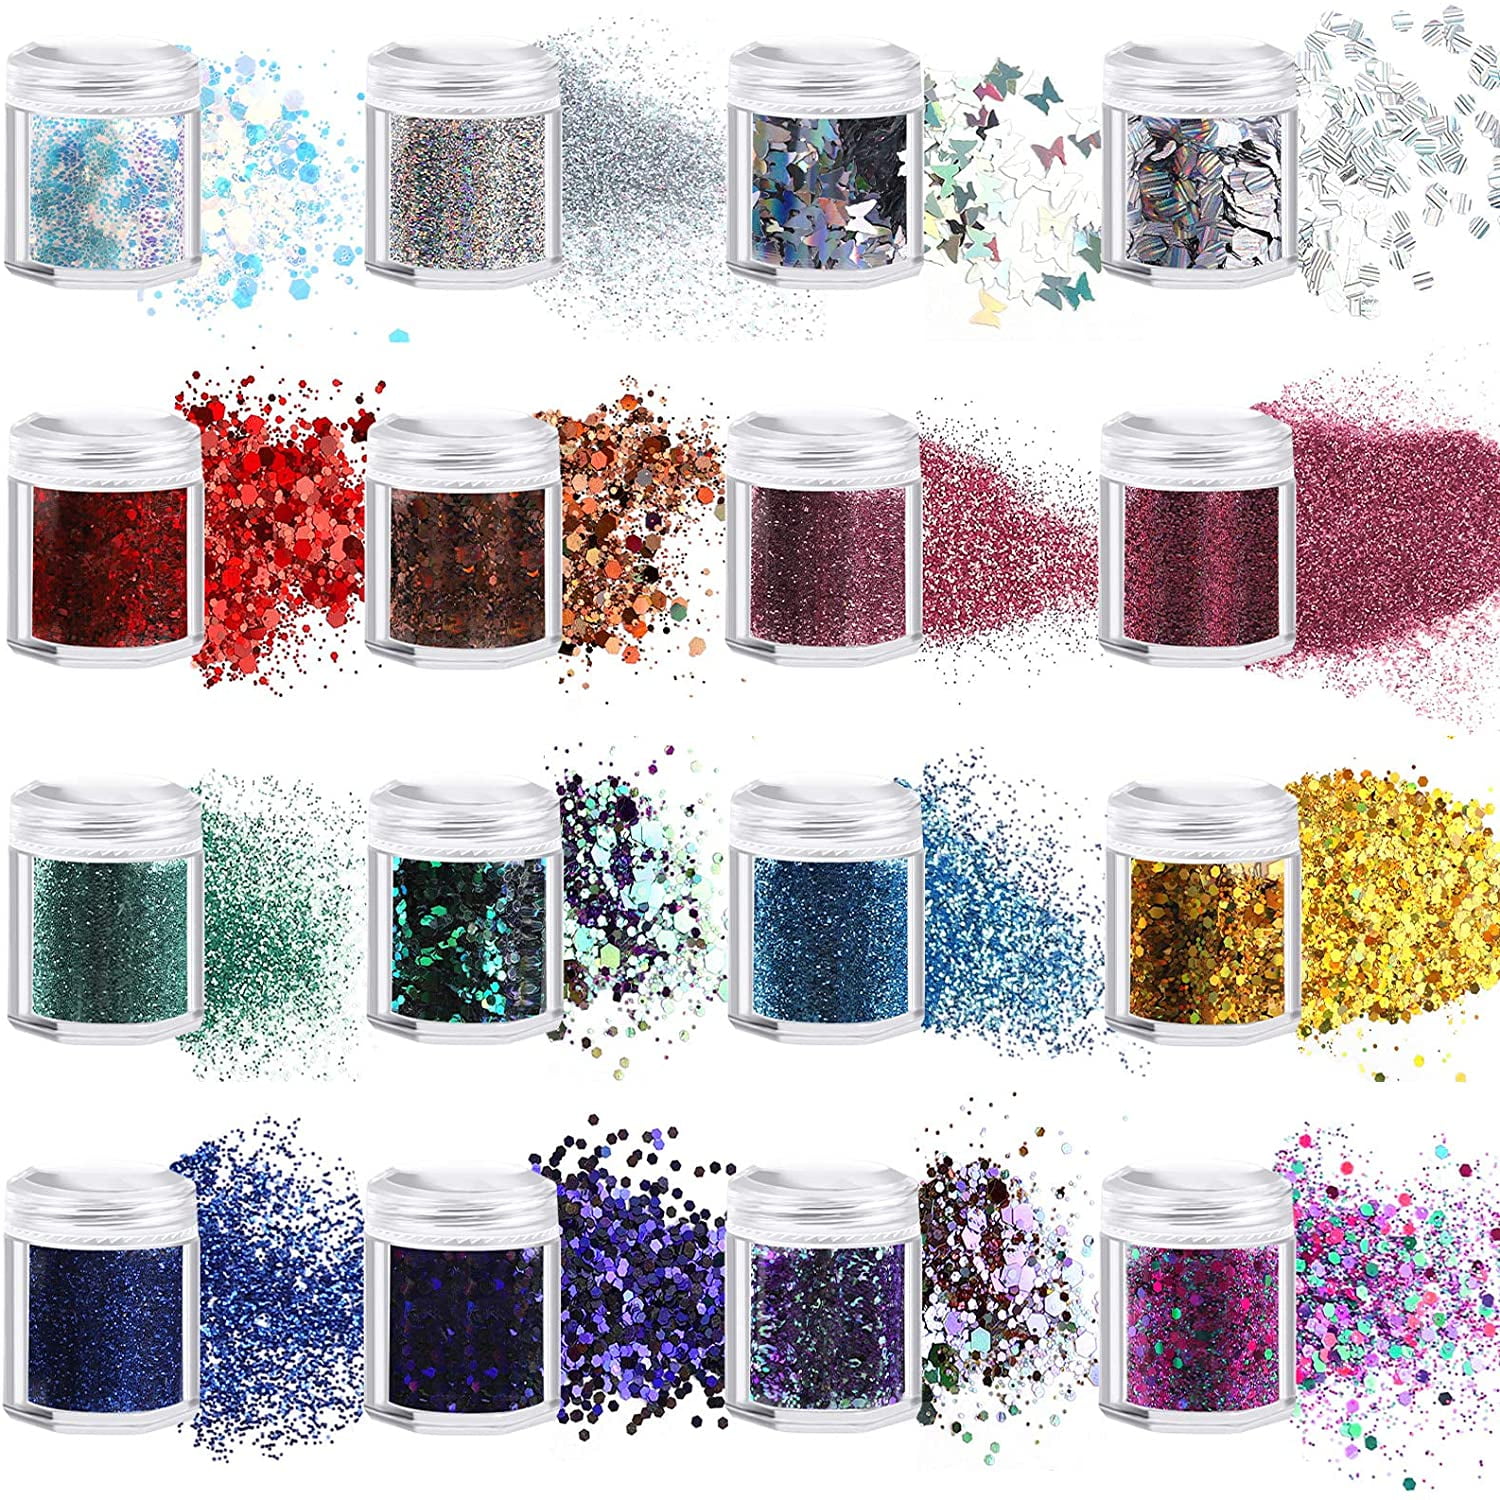 Teenitor Fine Glitter, Glitter for Nails, 32 Jars 8g Each Glitter Set, 32  Assorted Color Arts and Craft Glitter, Eyeshadow Makeup Nail Art Pigment